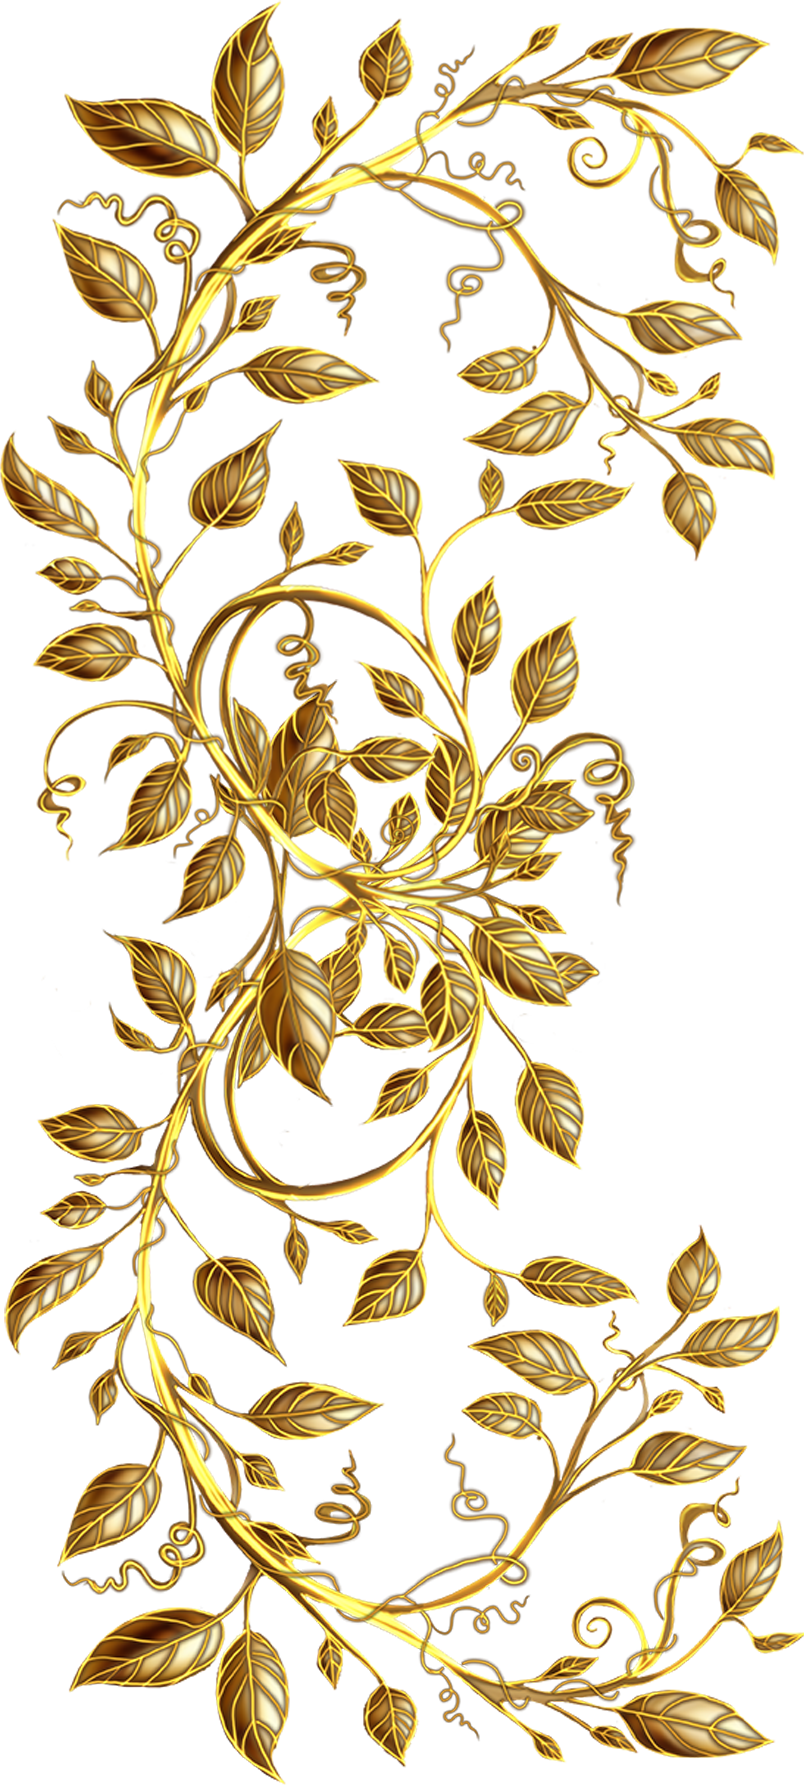 Gold vines with gold leaves